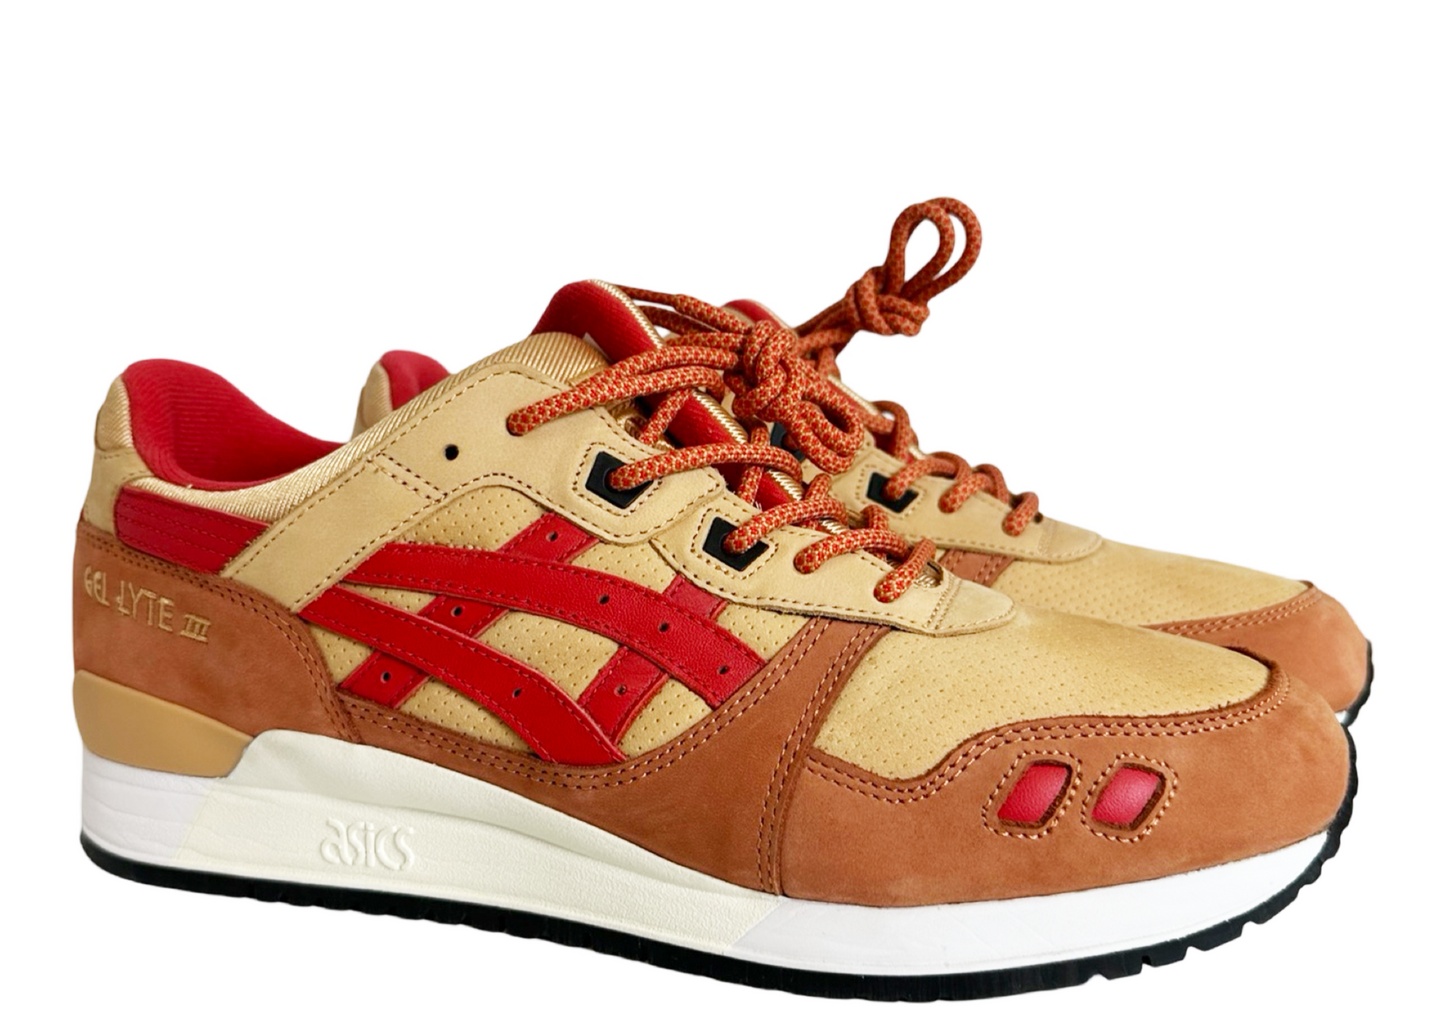 ASICS Gel-Lyte III '07 Remastered Kith Marvel X-Men (Trading Card Included)